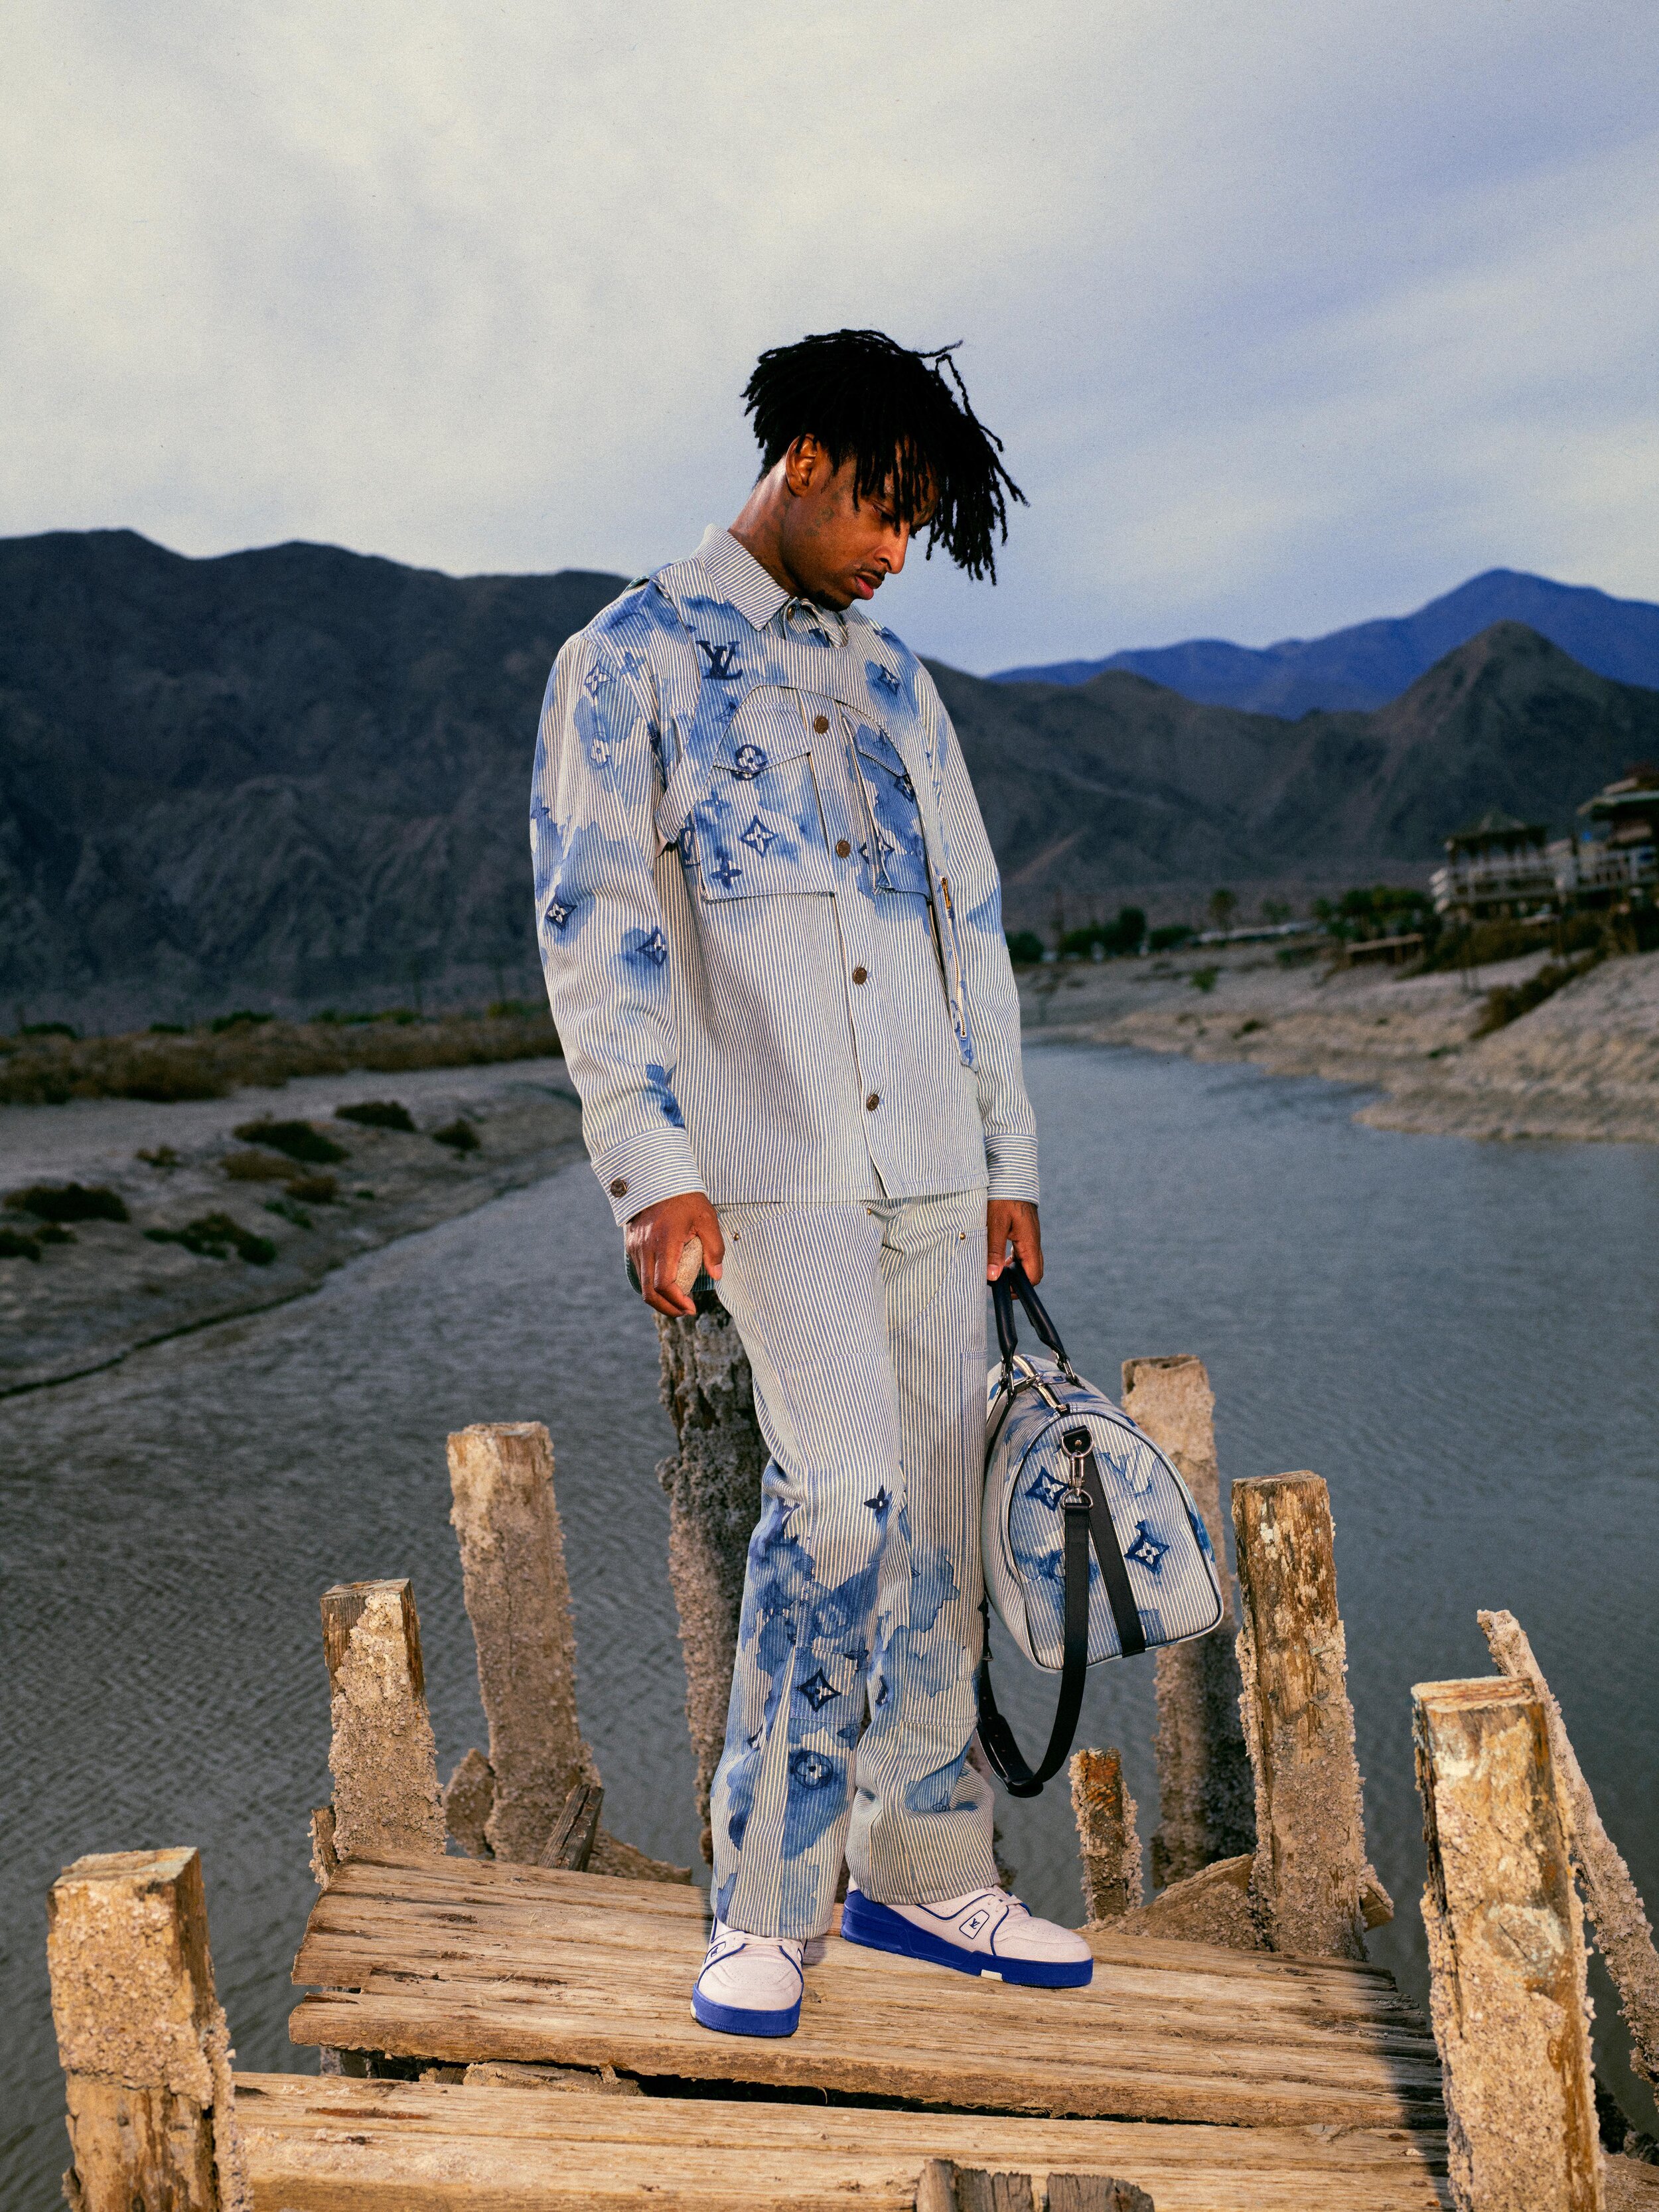 Louis Vuitton Summer 2021 by Virgil Abloh featuring 21 Savage